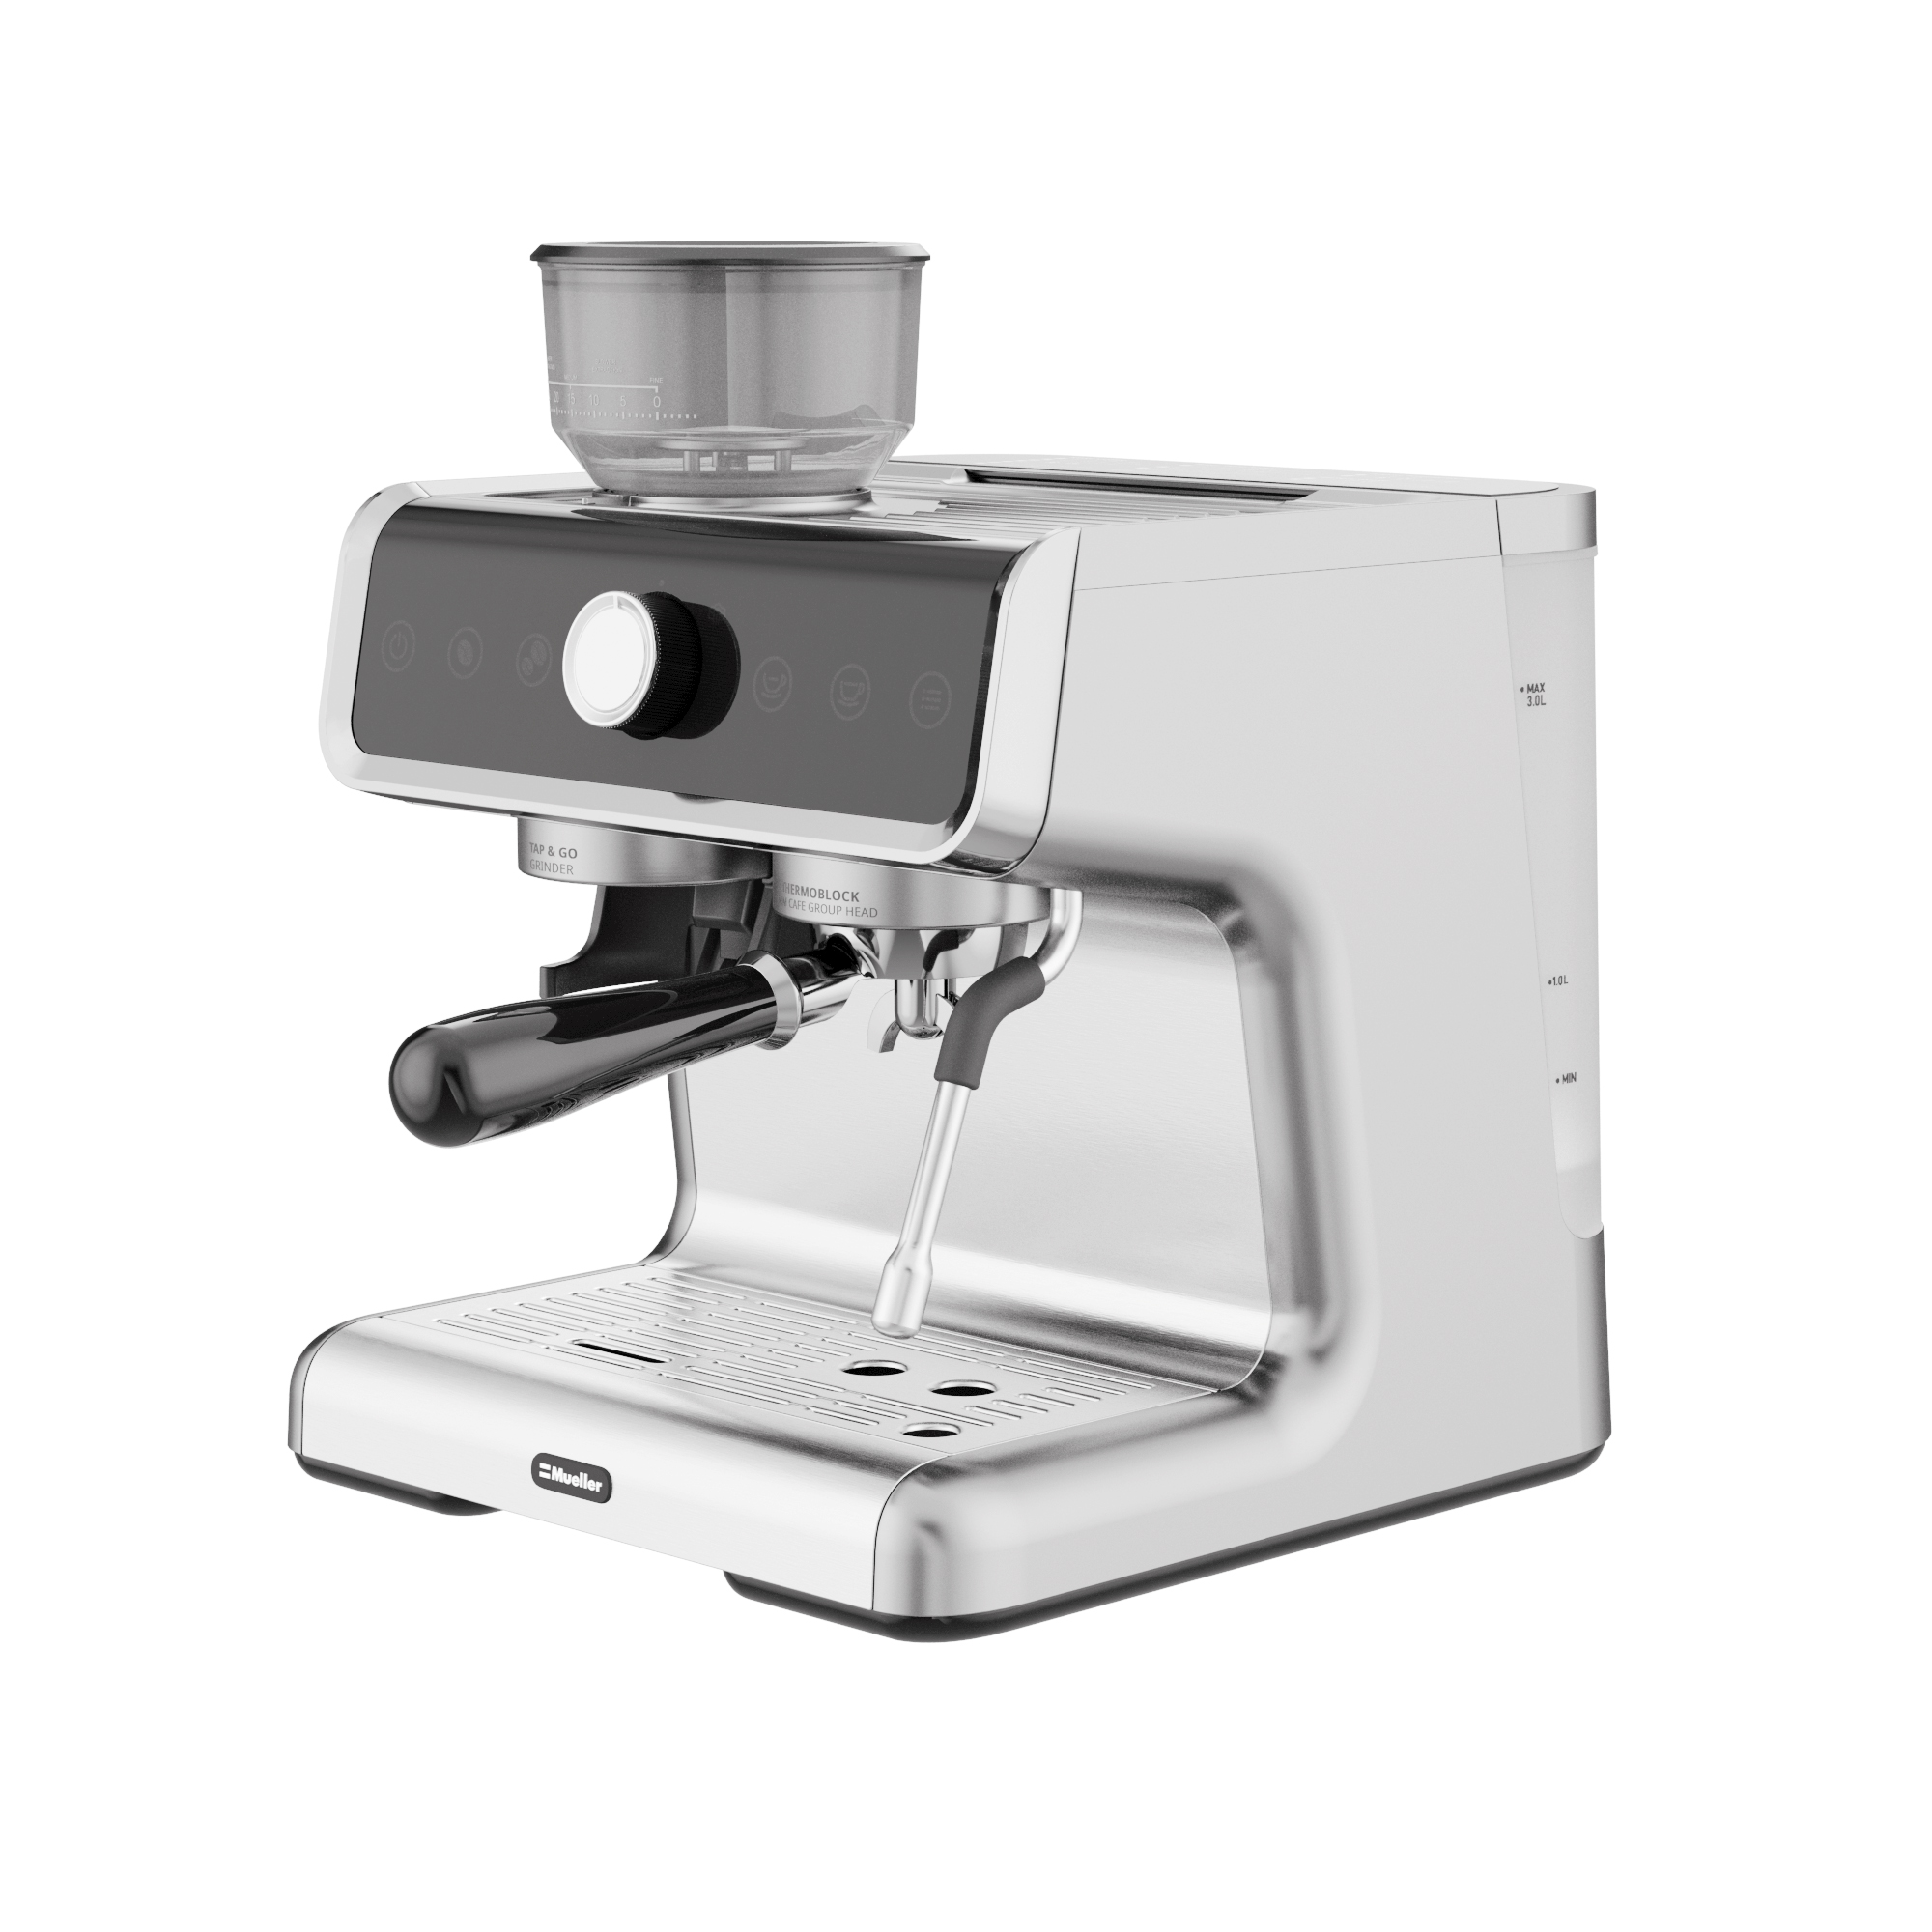 Mueller Premium Espresso Machine Coffee Maker with Milk Frother, Grinder,  15 Bar, Stainless Steel, Standard and Bottomless Portafilter, Multiple  Filters, Temp Control, Silver 